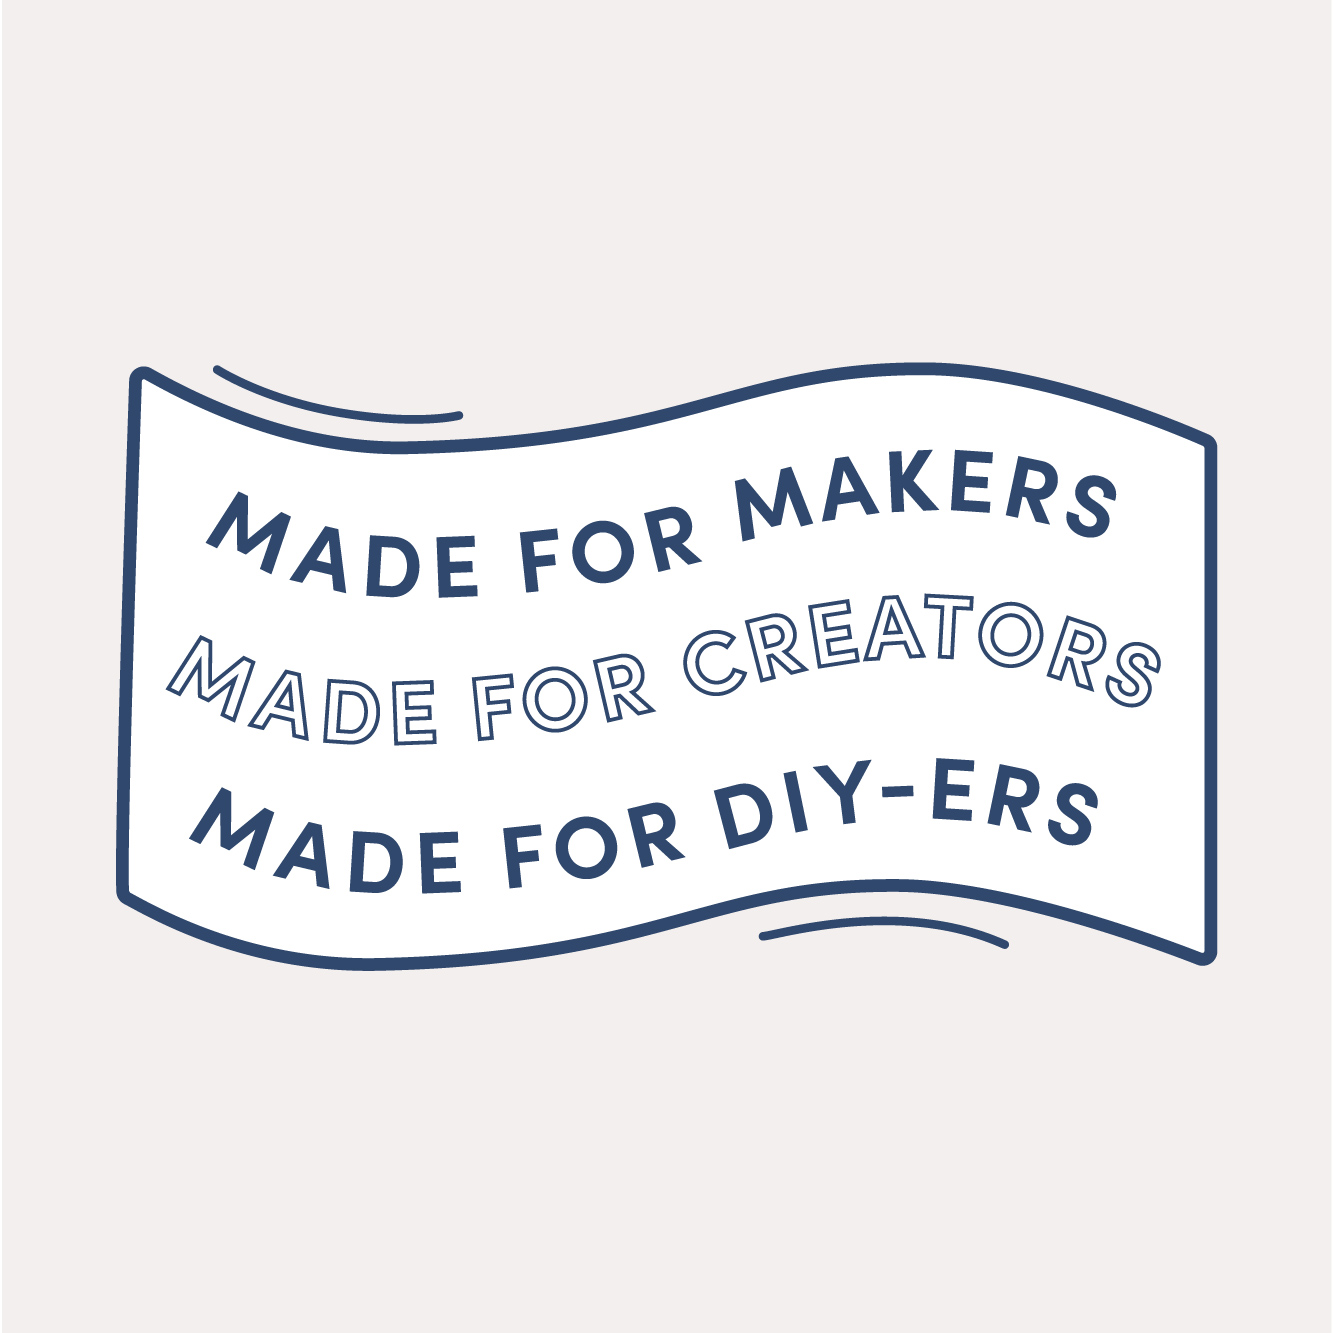 Features_Badges_Made For Makers